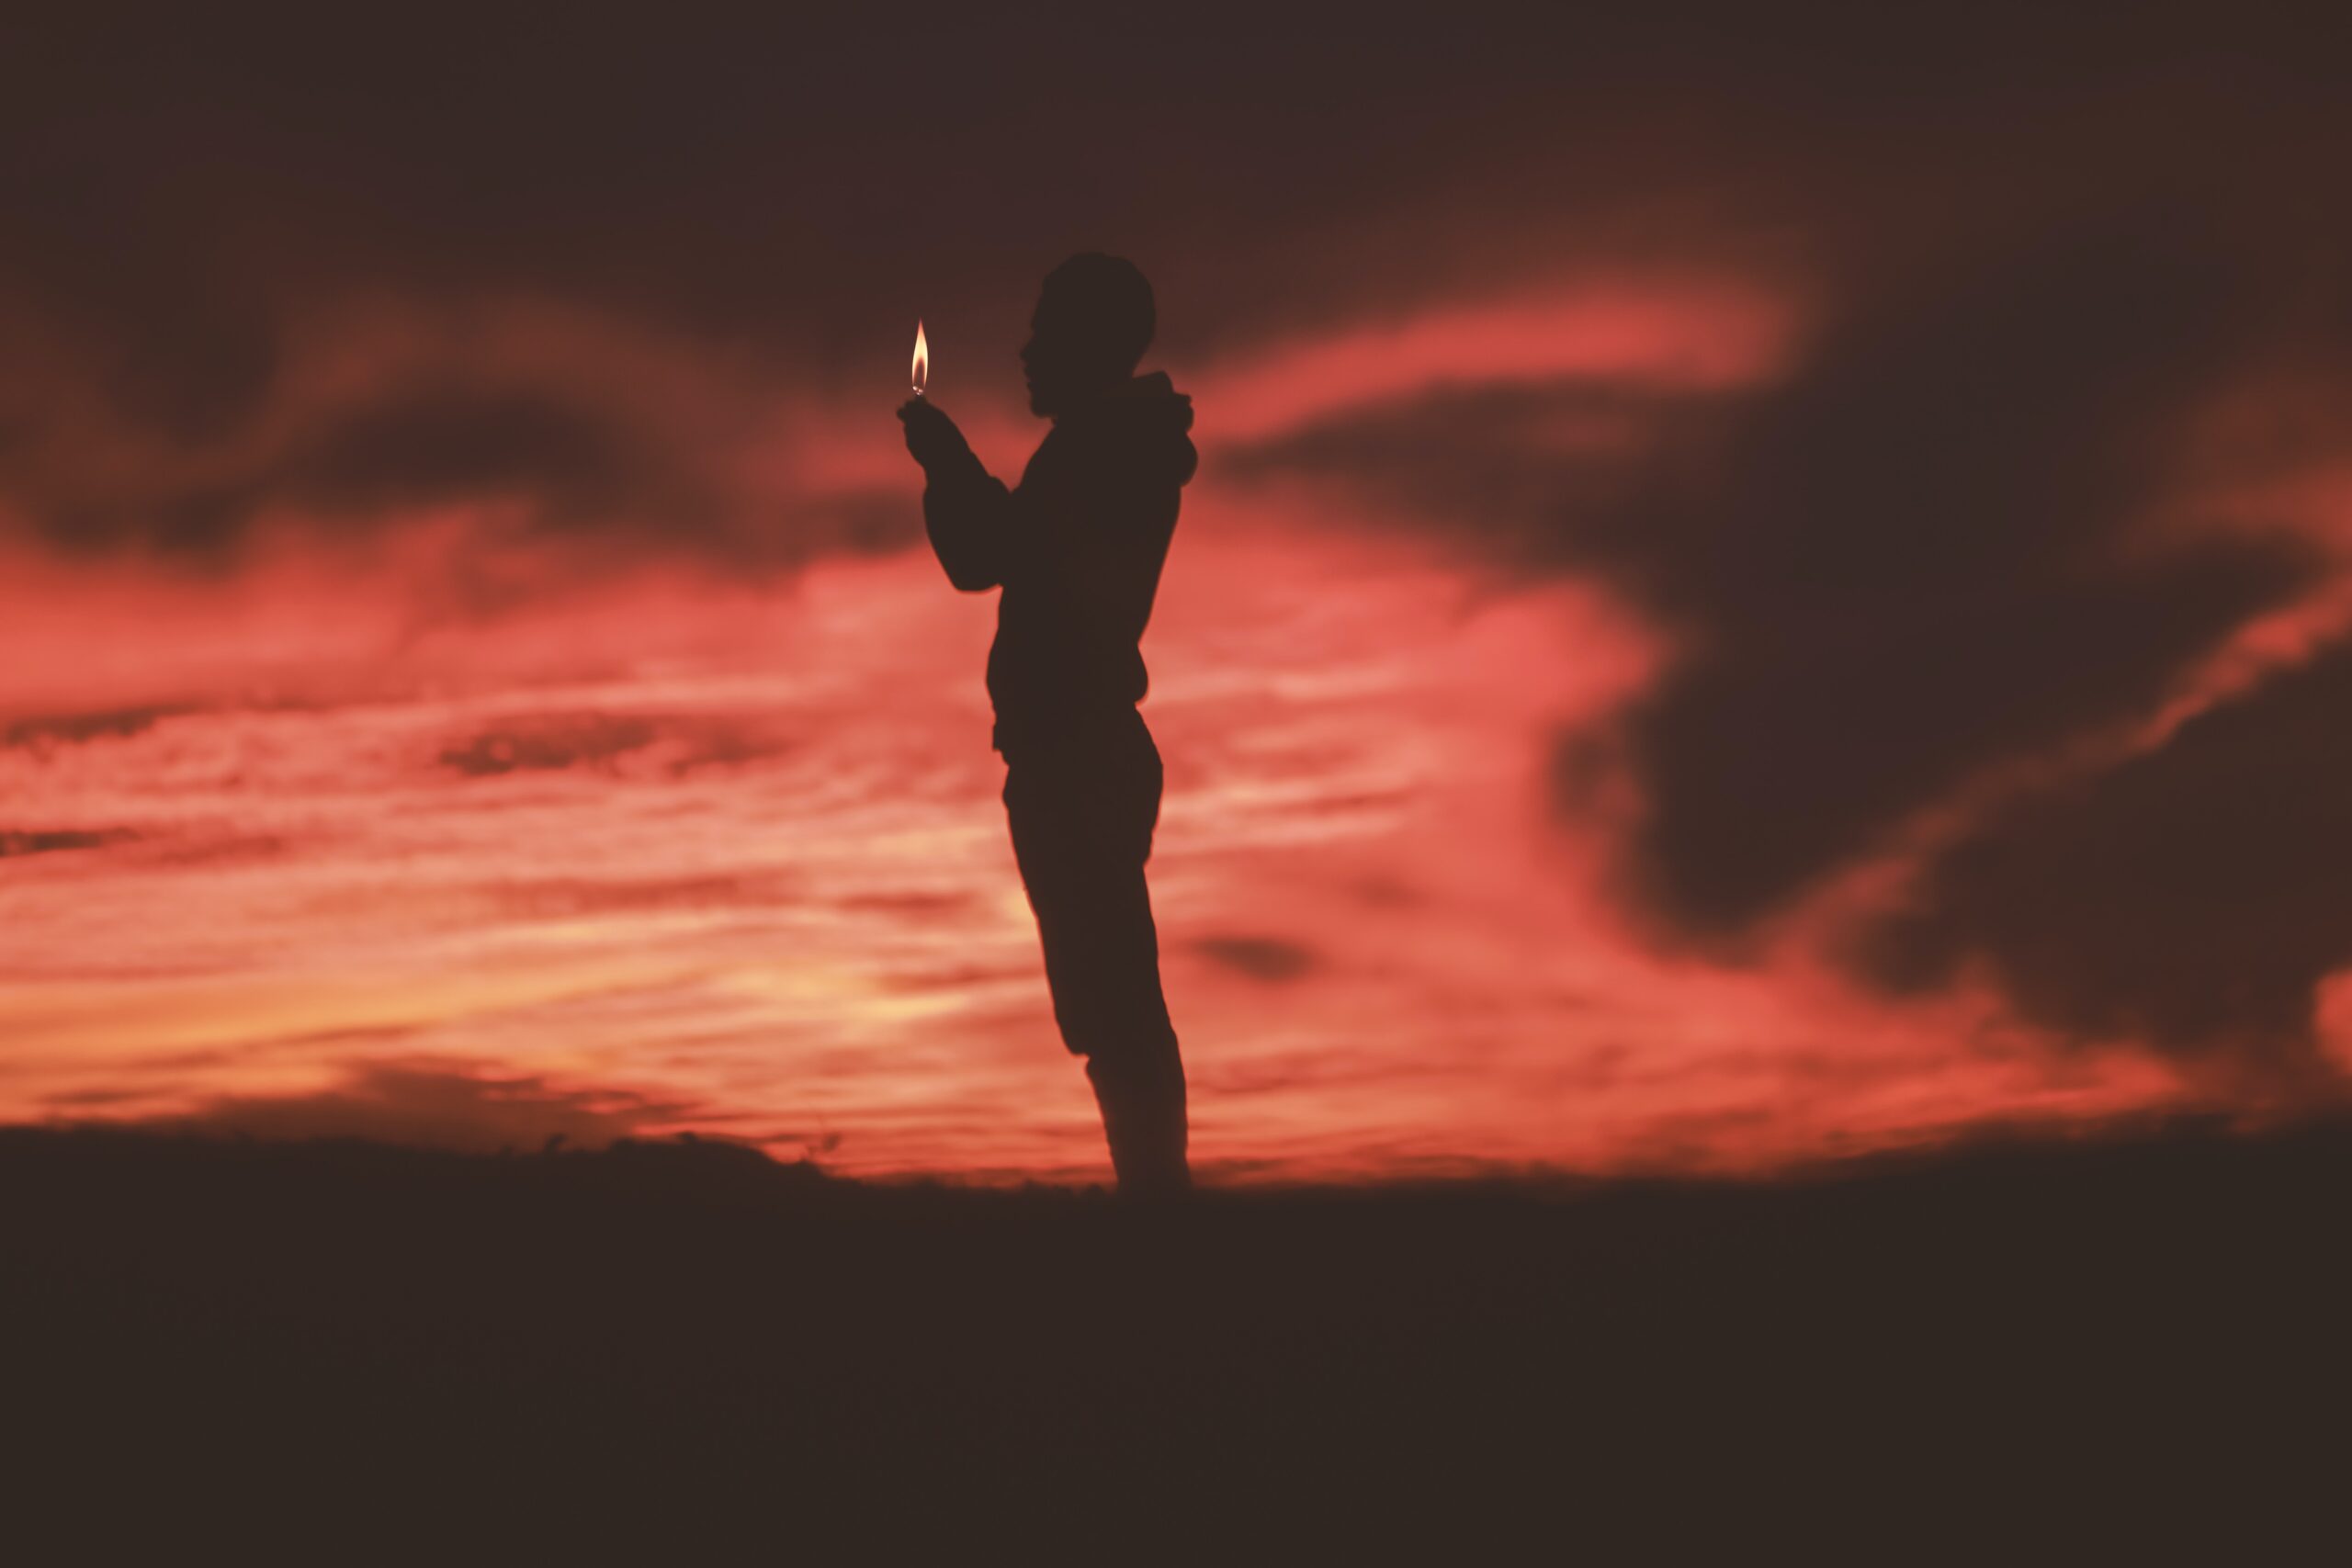 person standing in silhouette against reddish dark sky, holding a flame